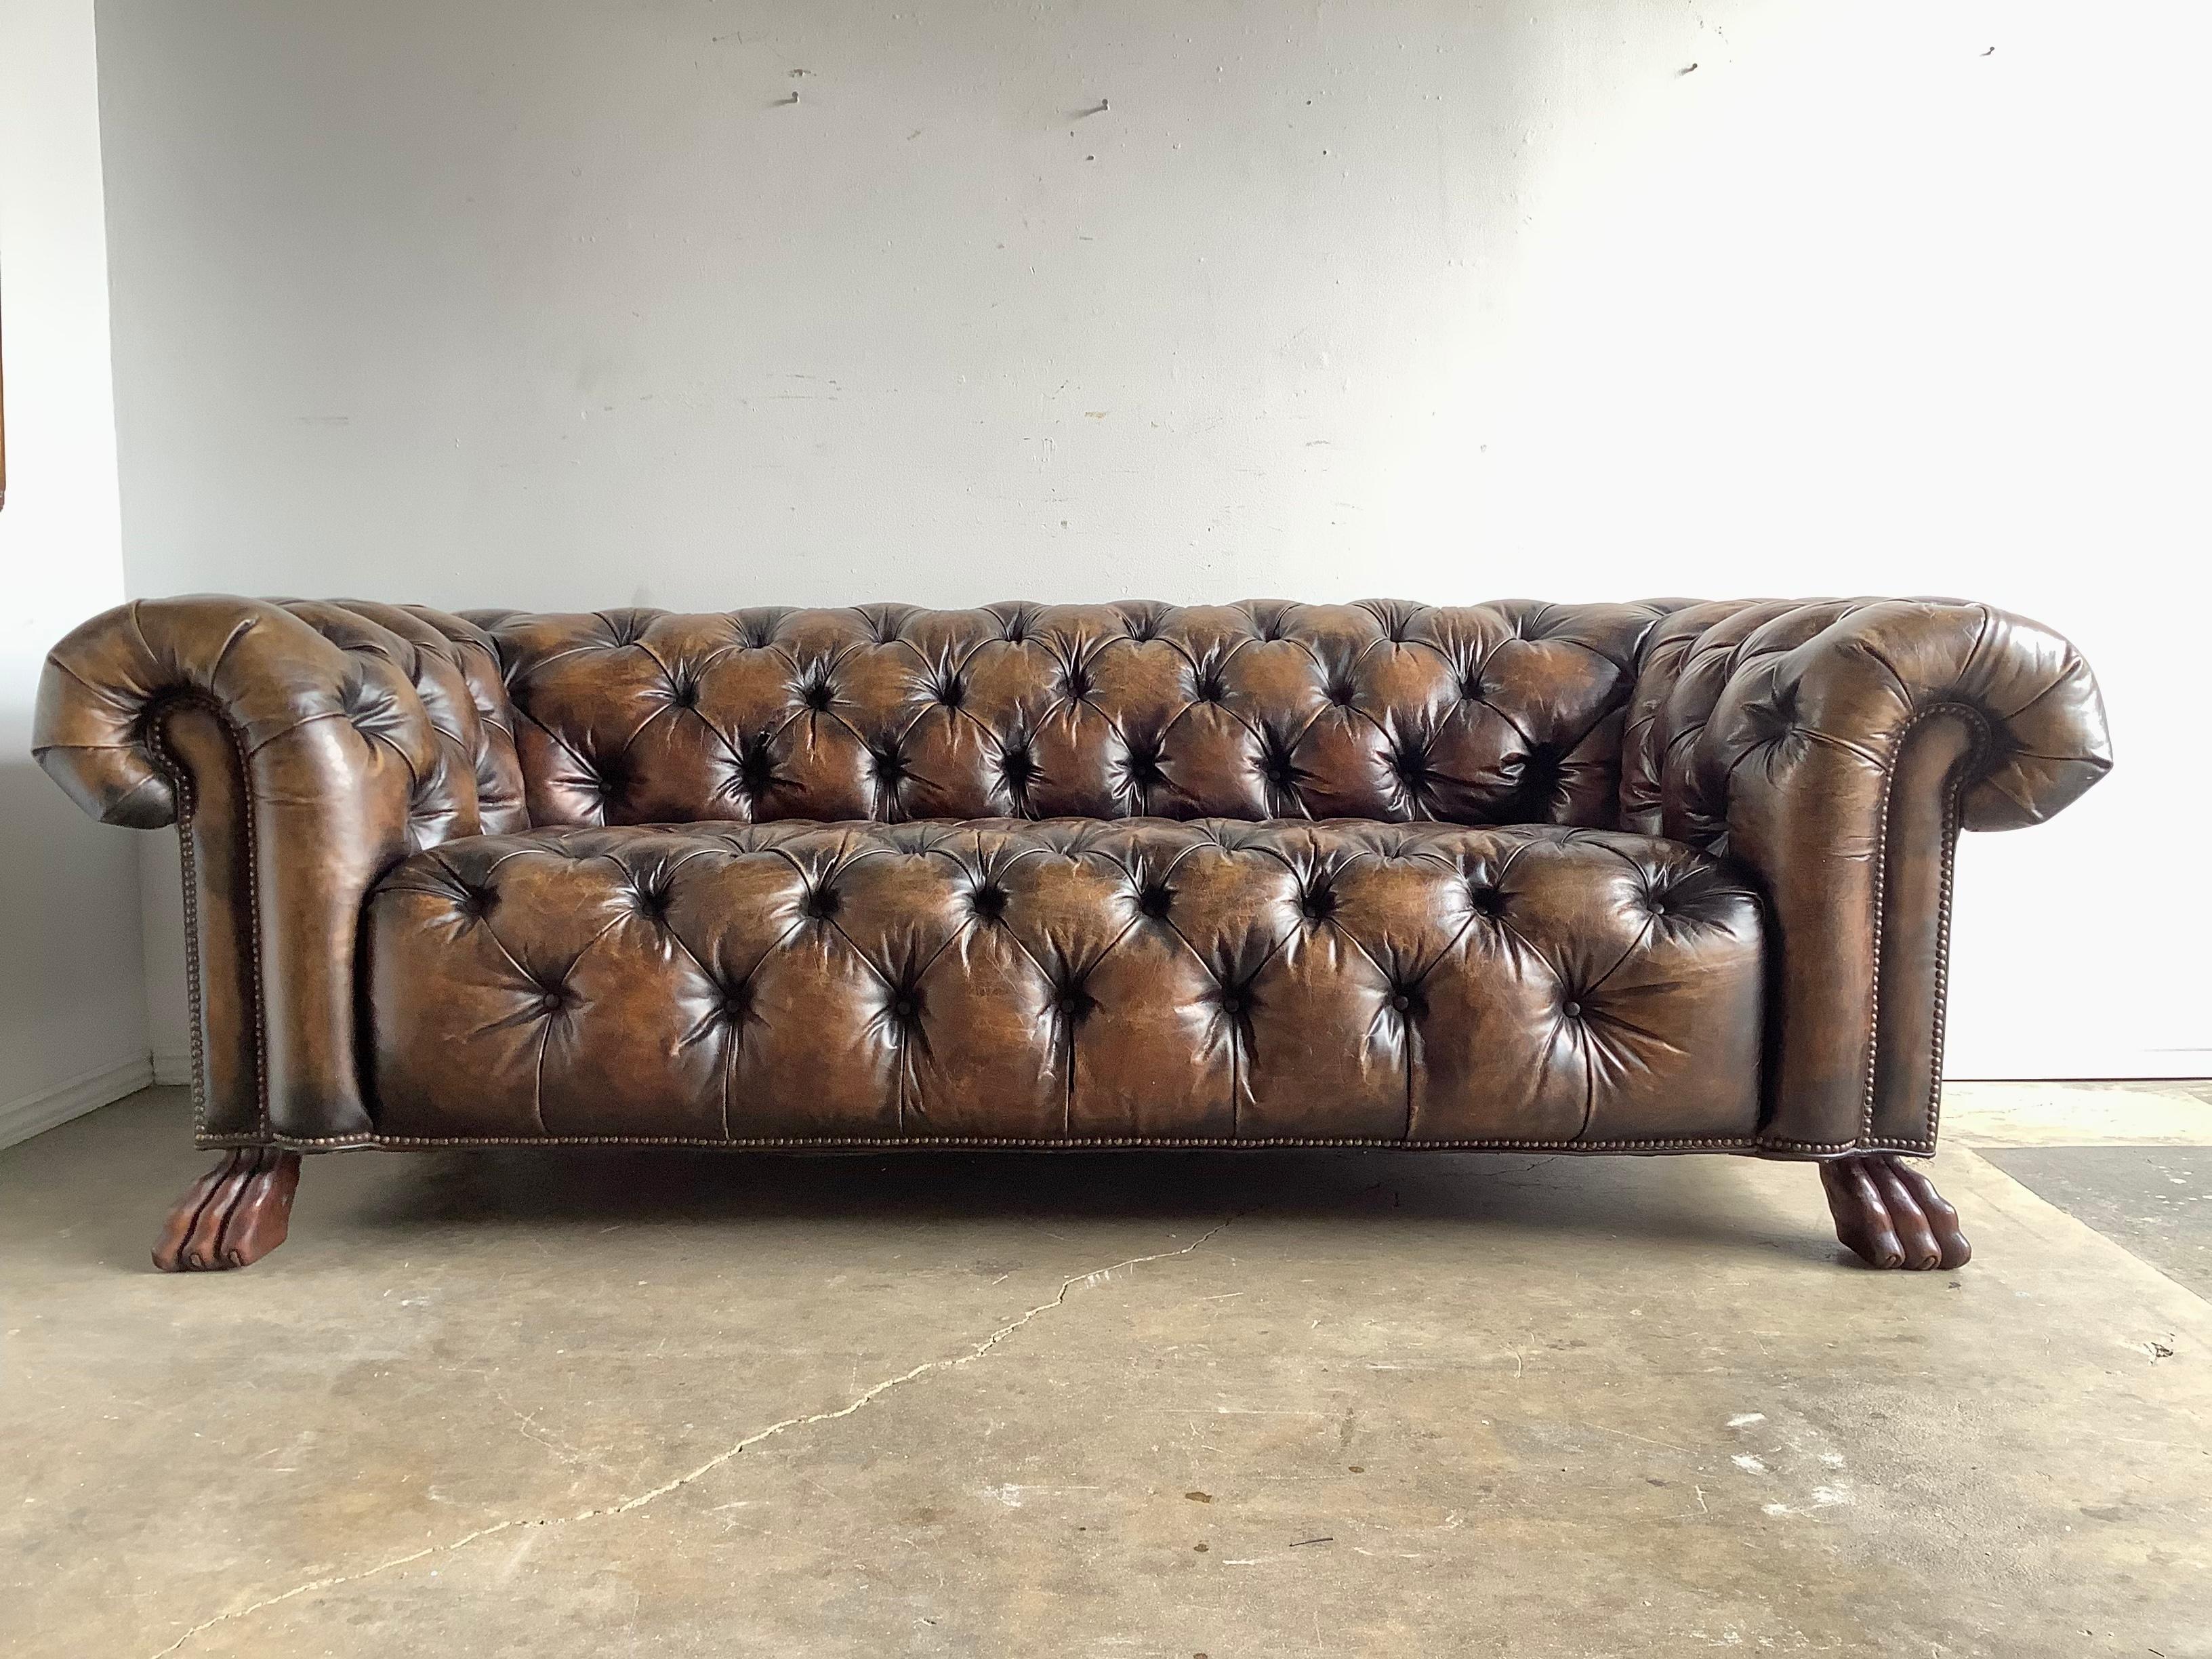 English leather tufted tobacco colored Chesterfield style sofa with nailhead trim detail. The sofa stands on four hand carved wood lion paw feet